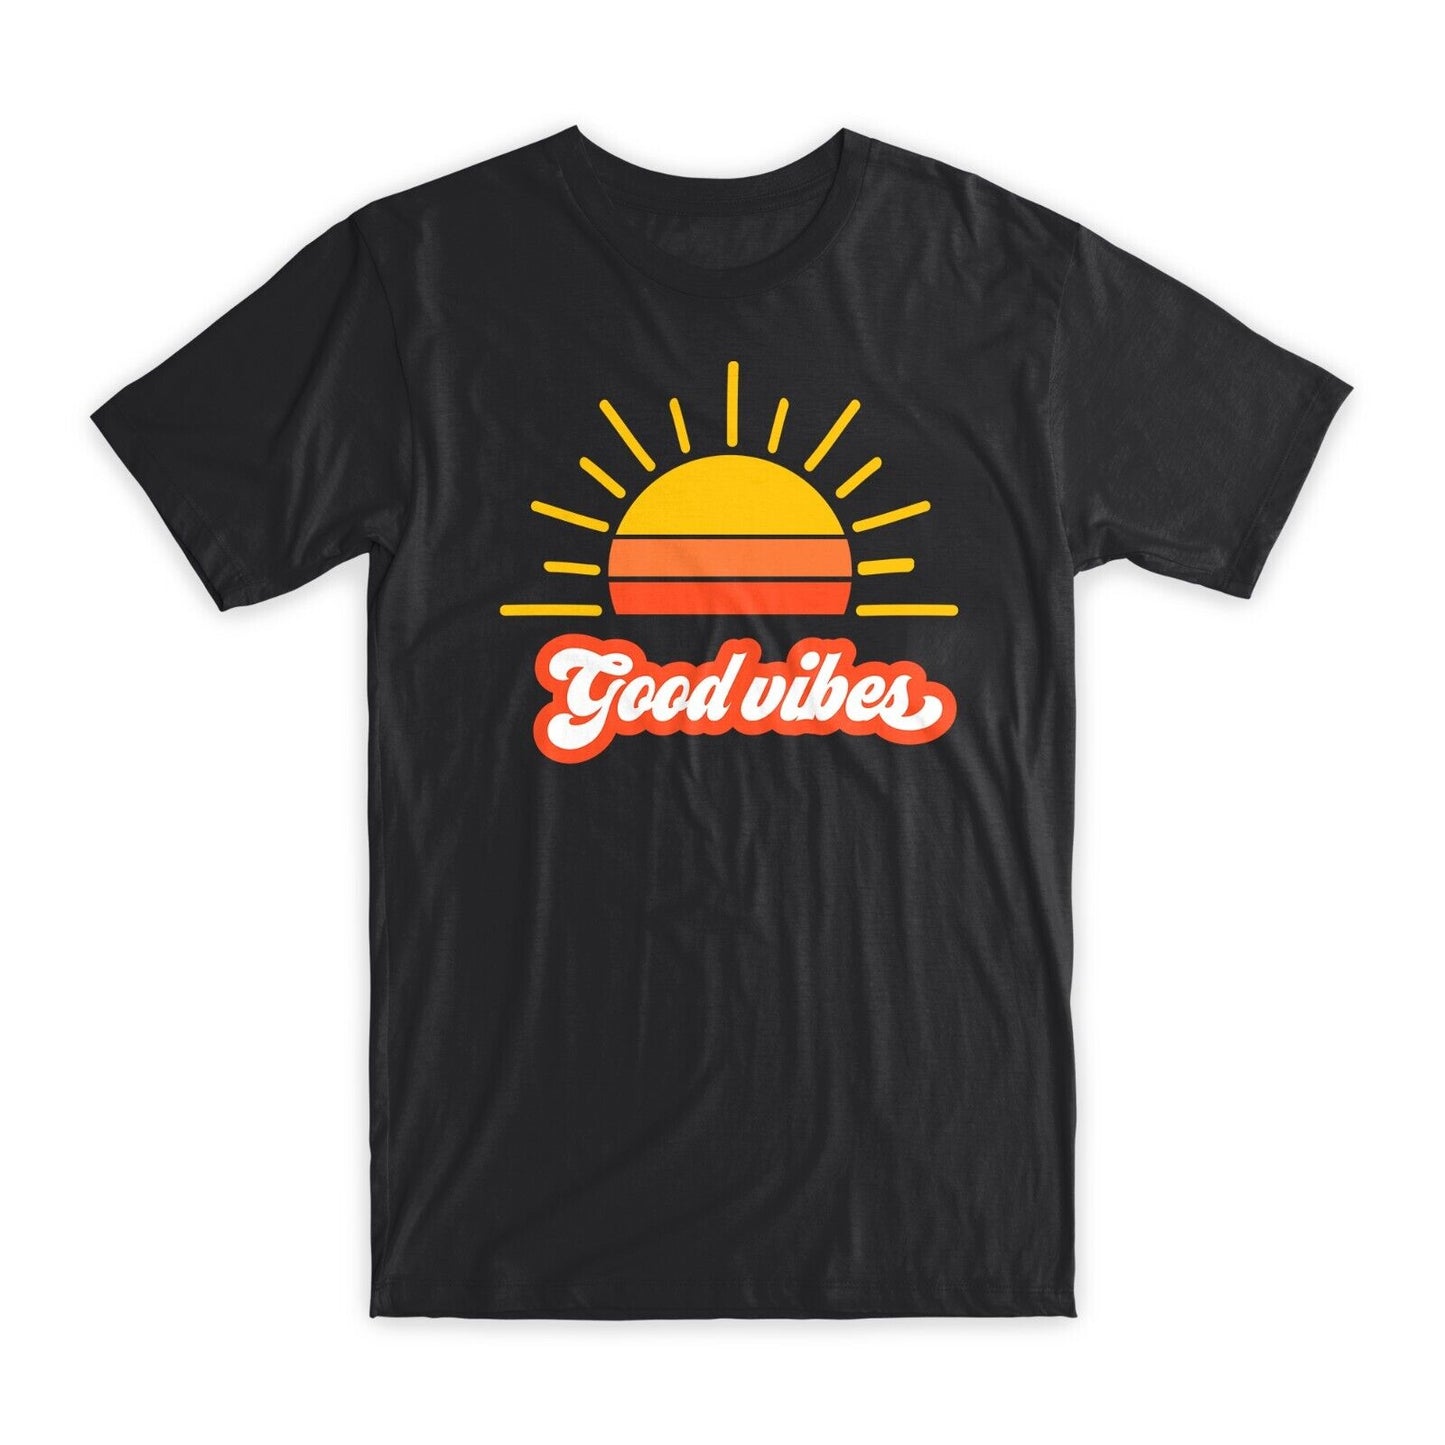 Good Vibes Sun T-Shirt Premium Soft Cotton Crew Neck Funny Tees Novelty Gift NEW